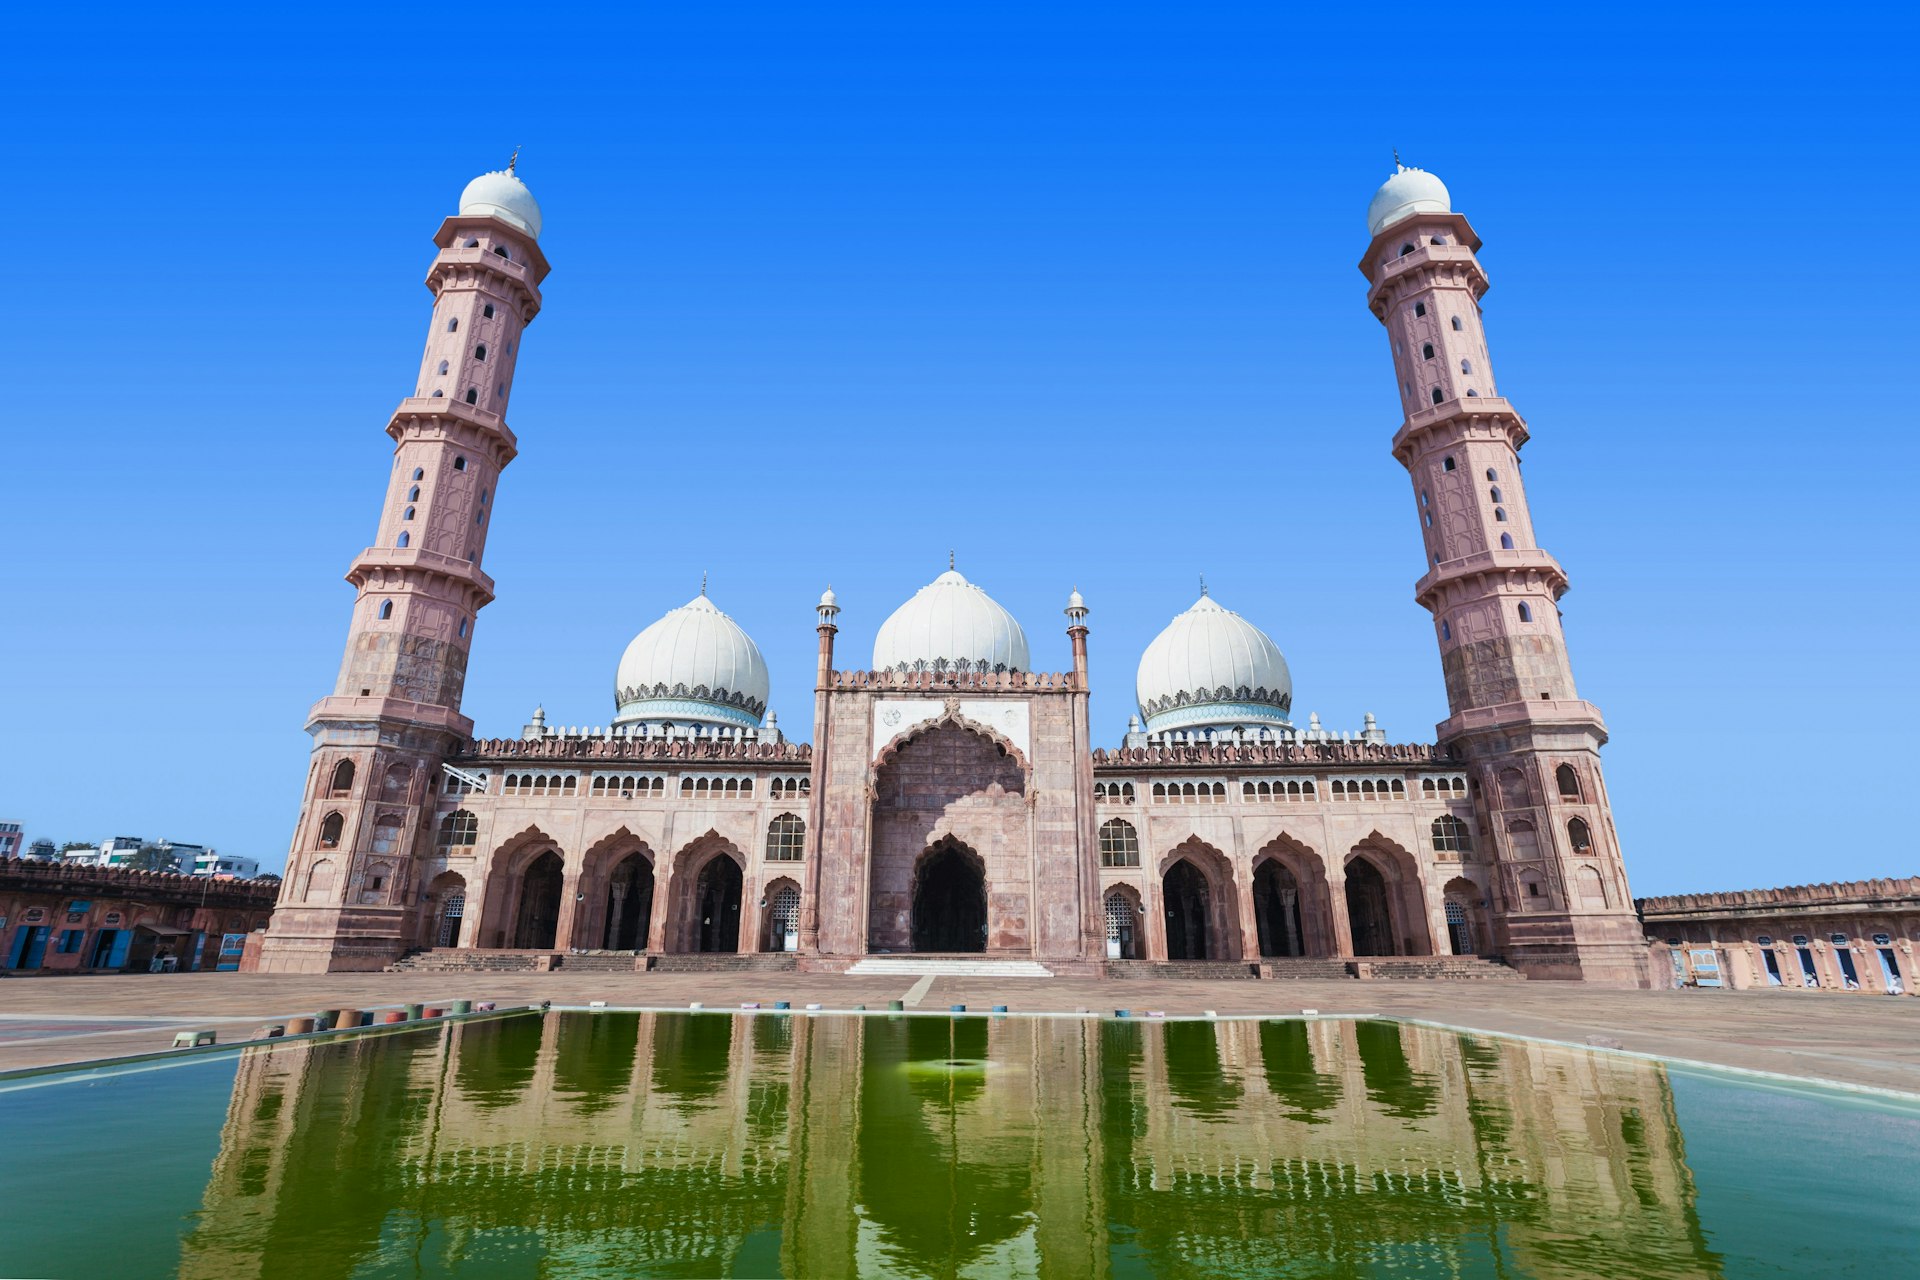 A view of Taj-ul-Masjid from the front, with the large mosque reflected in the pool used for washing in its central courtyard. The large mosque has three white domes and a towering minaret at both ends.